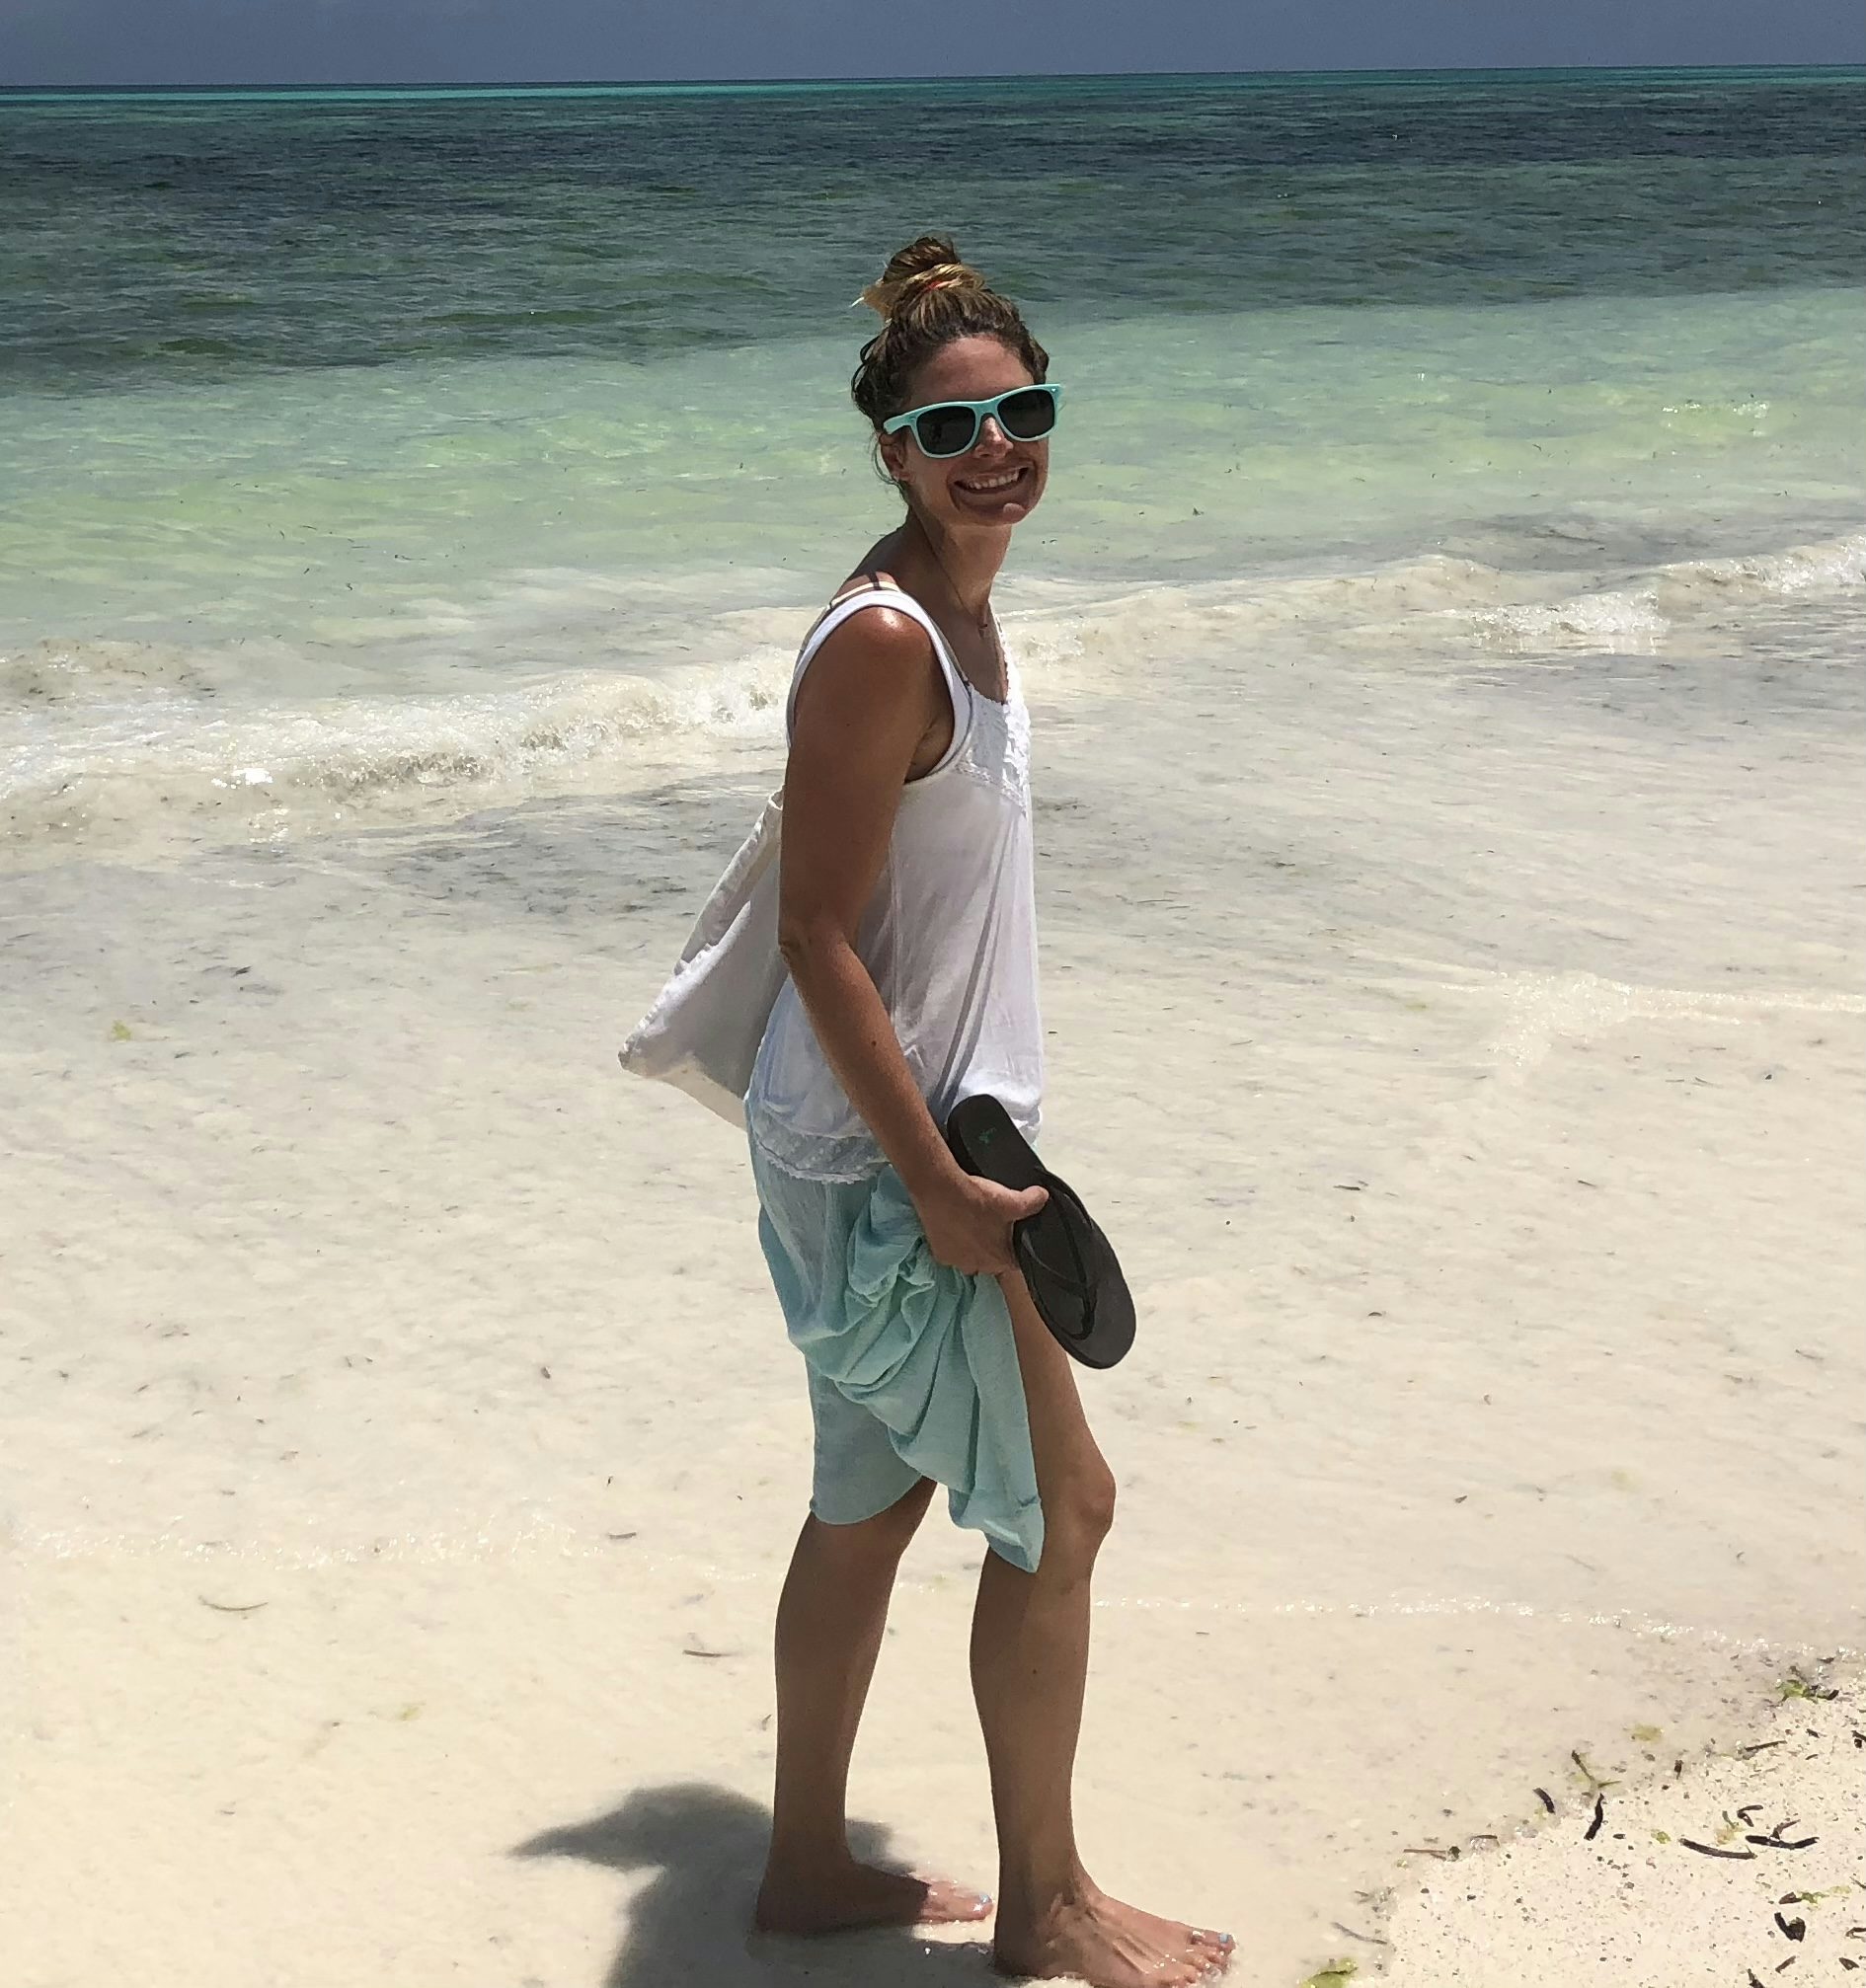 Travel advisor Keeley Landes smiles on a beach wearing a white tank top and turquoise sunglasses